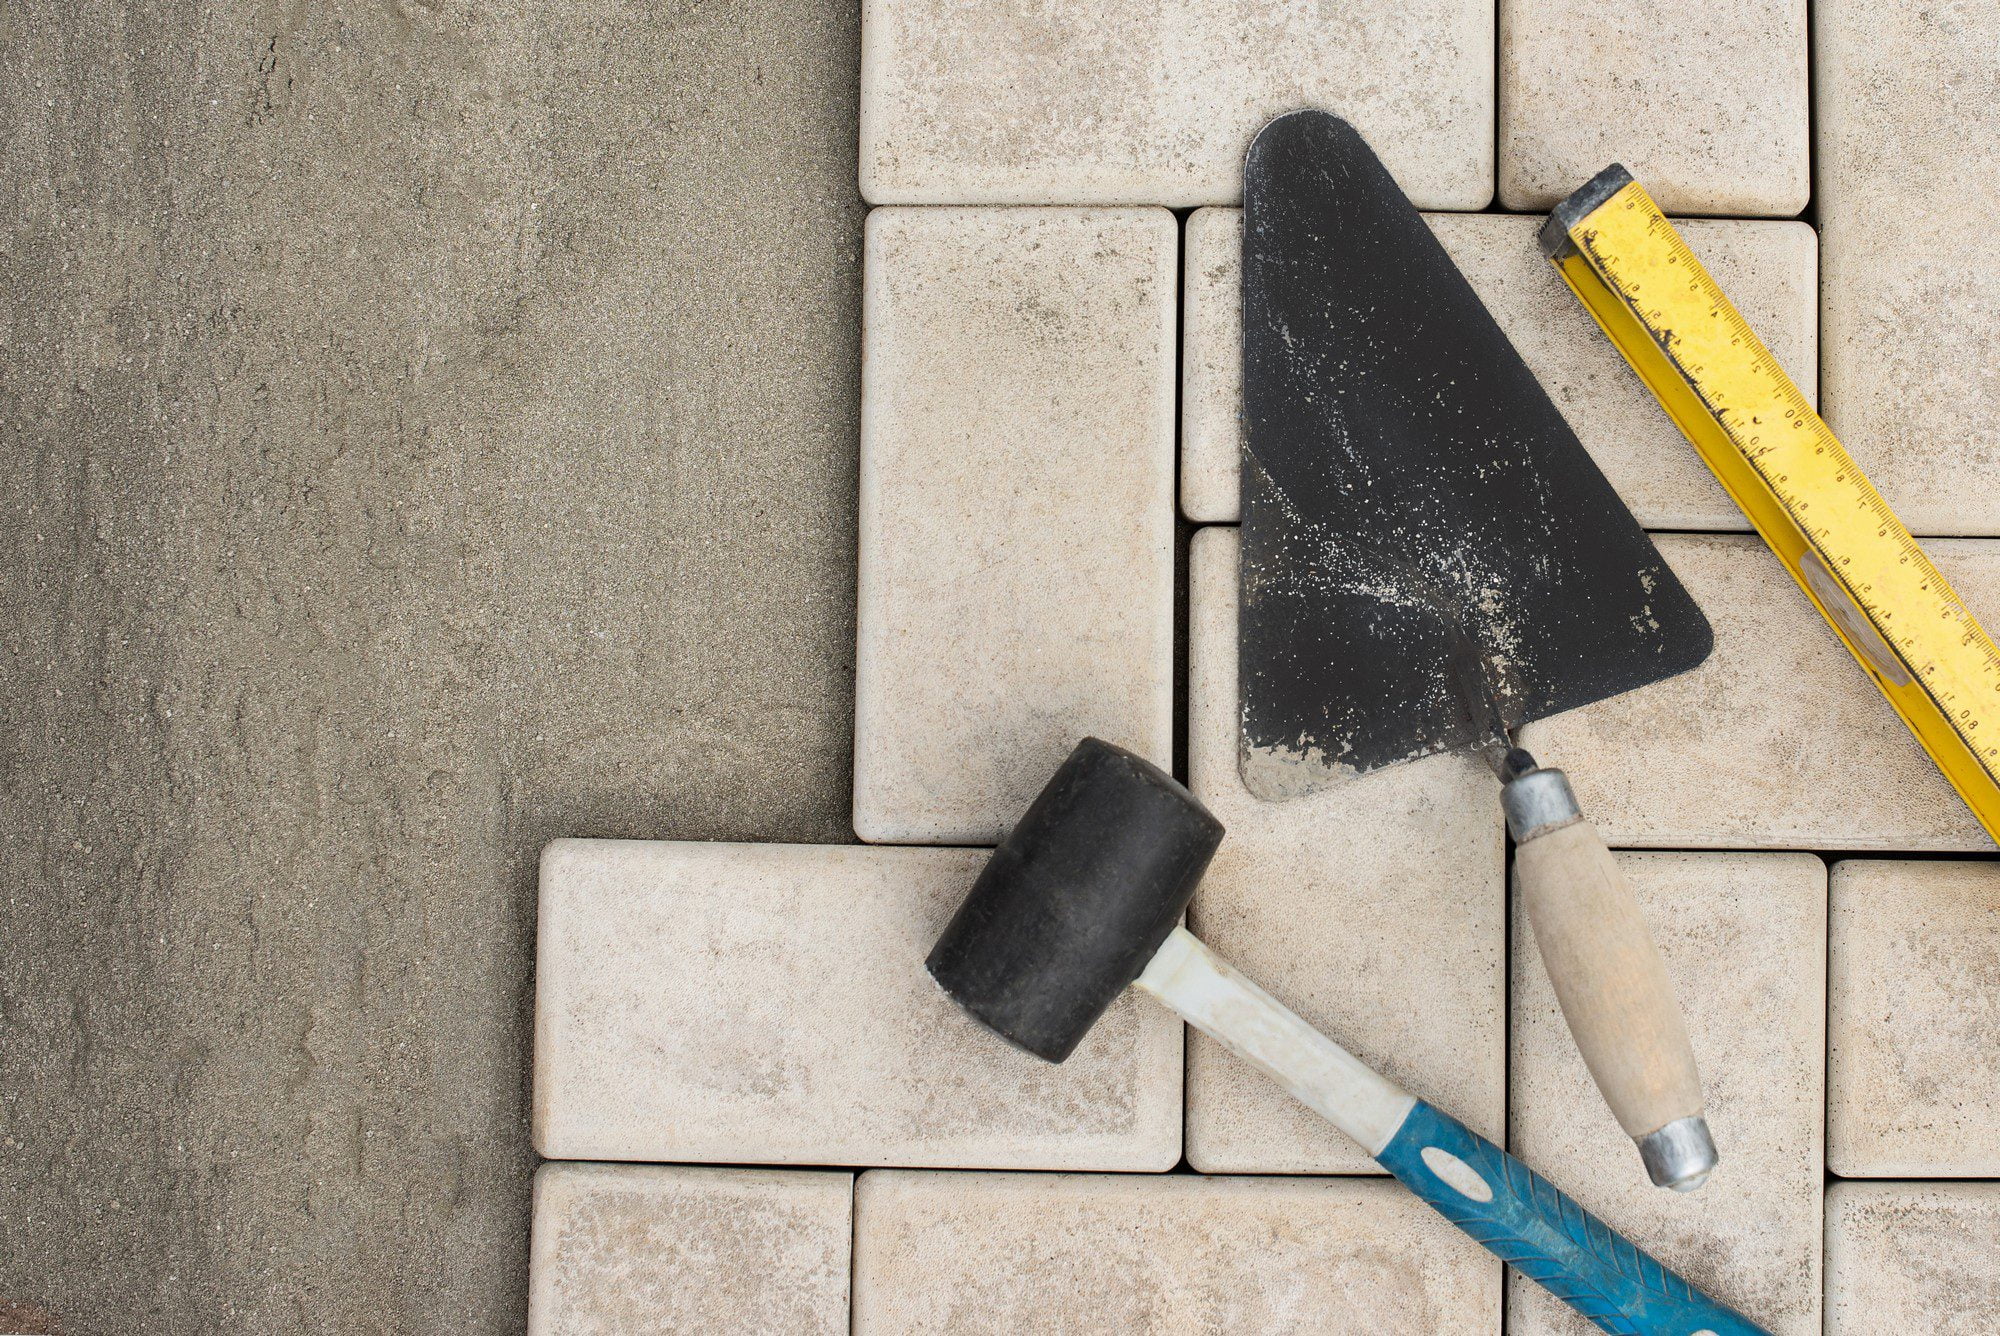 The image shows a set of tools and materials typically used for paving or laying tiles. There is a black rubber mallet, a trowel with a black blade and a wooden handle, and a yellow folding ruler. The tools are laid on a surface of beige paving stones that are partially interlocked, with some spaces where stones appear to be missing or have been removed, possibly for repair or during the process of laying the stones. The background suggests an outdoor or construction environment.